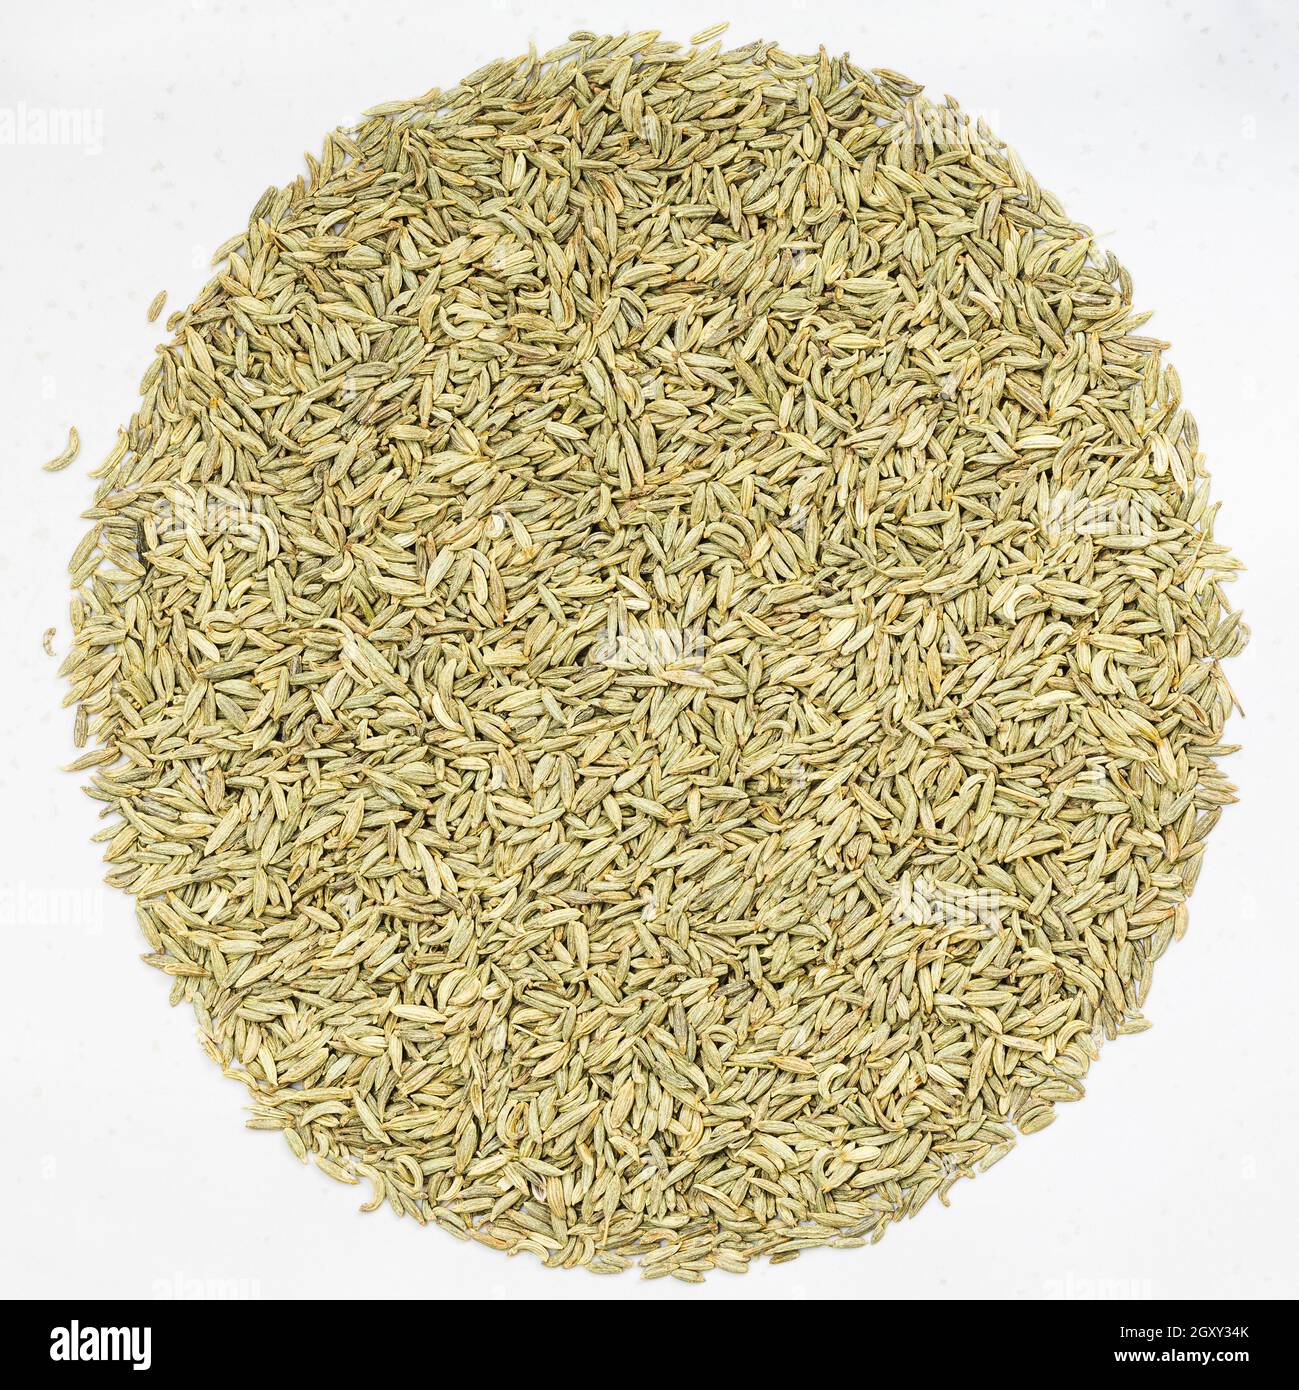 top view of pile of anise seeds on gray ceramic plate Stock Photo